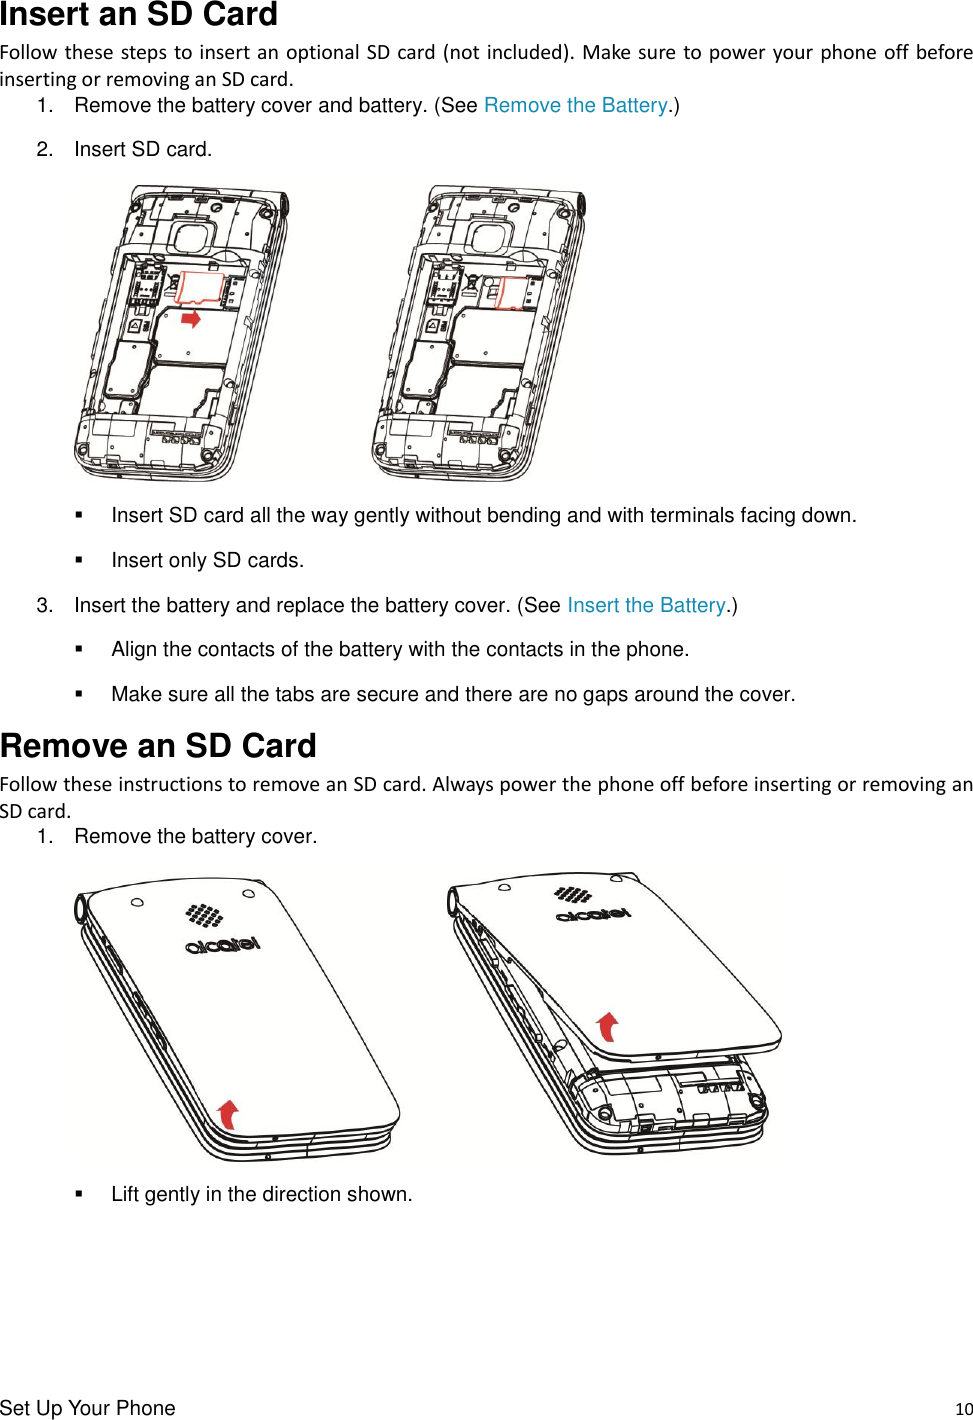 Set Up Your Phone    10 Insert an SD Card Follow these steps to insert an optional SD card (not included). Make  sure to power your phone off before inserting or removing an SD card. 1.  Remove the battery cover and battery. (See Remove the Battery.) 2.  Insert SD card.     Insert SD card all the way gently without bending and with terminals facing down.   Insert only SD cards. 3.  Insert the battery and replace the battery cover. (See Insert the Battery.)   Align the contacts of the battery with the contacts in the phone.   Make sure all the tabs are secure and there are no gaps around the cover. Remove an SD Card Follow these instructions to remove an SD card. Always power the phone off before inserting or removing an SD card. 1.  Remove the battery cover.     Lift gently in the direction shown.    